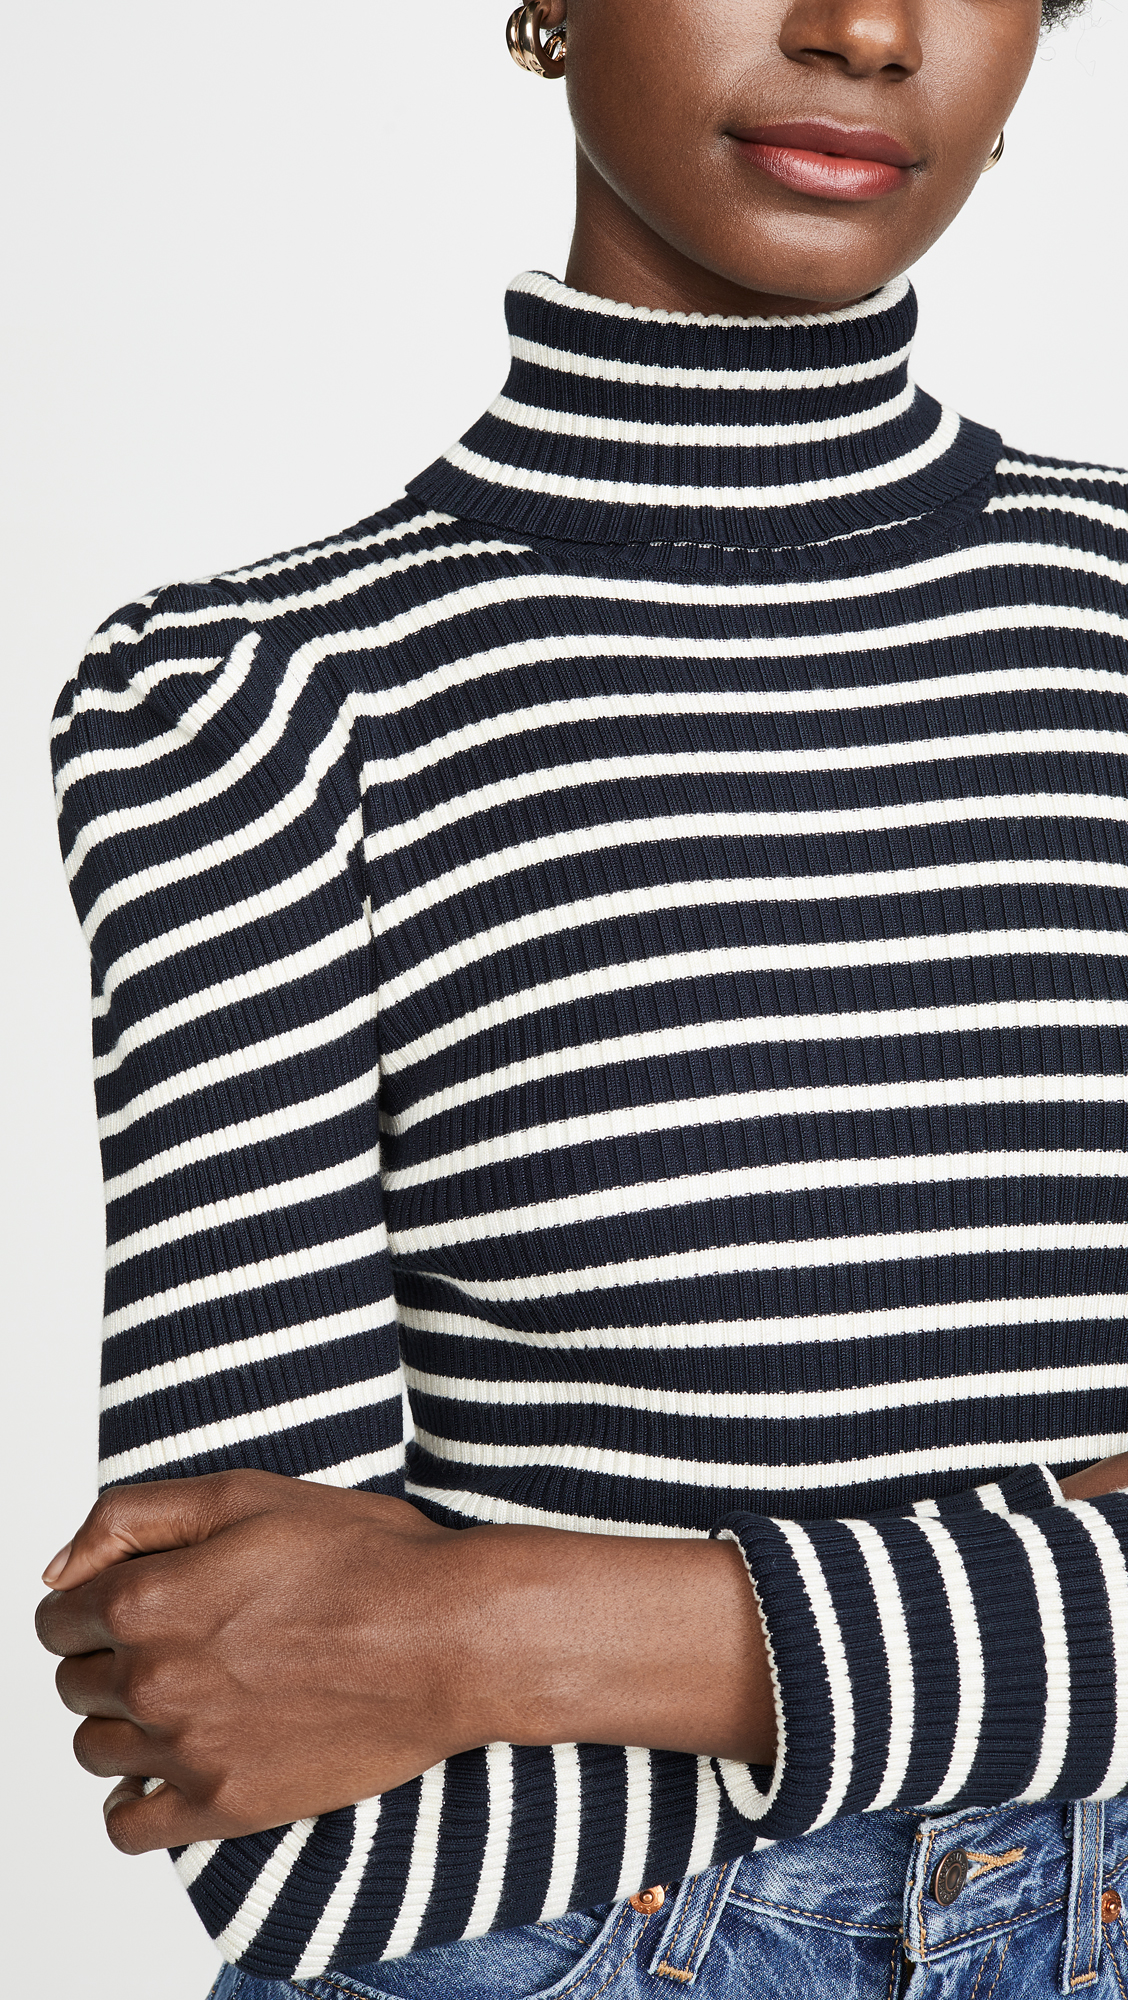 Striped Puff Sleeve Top